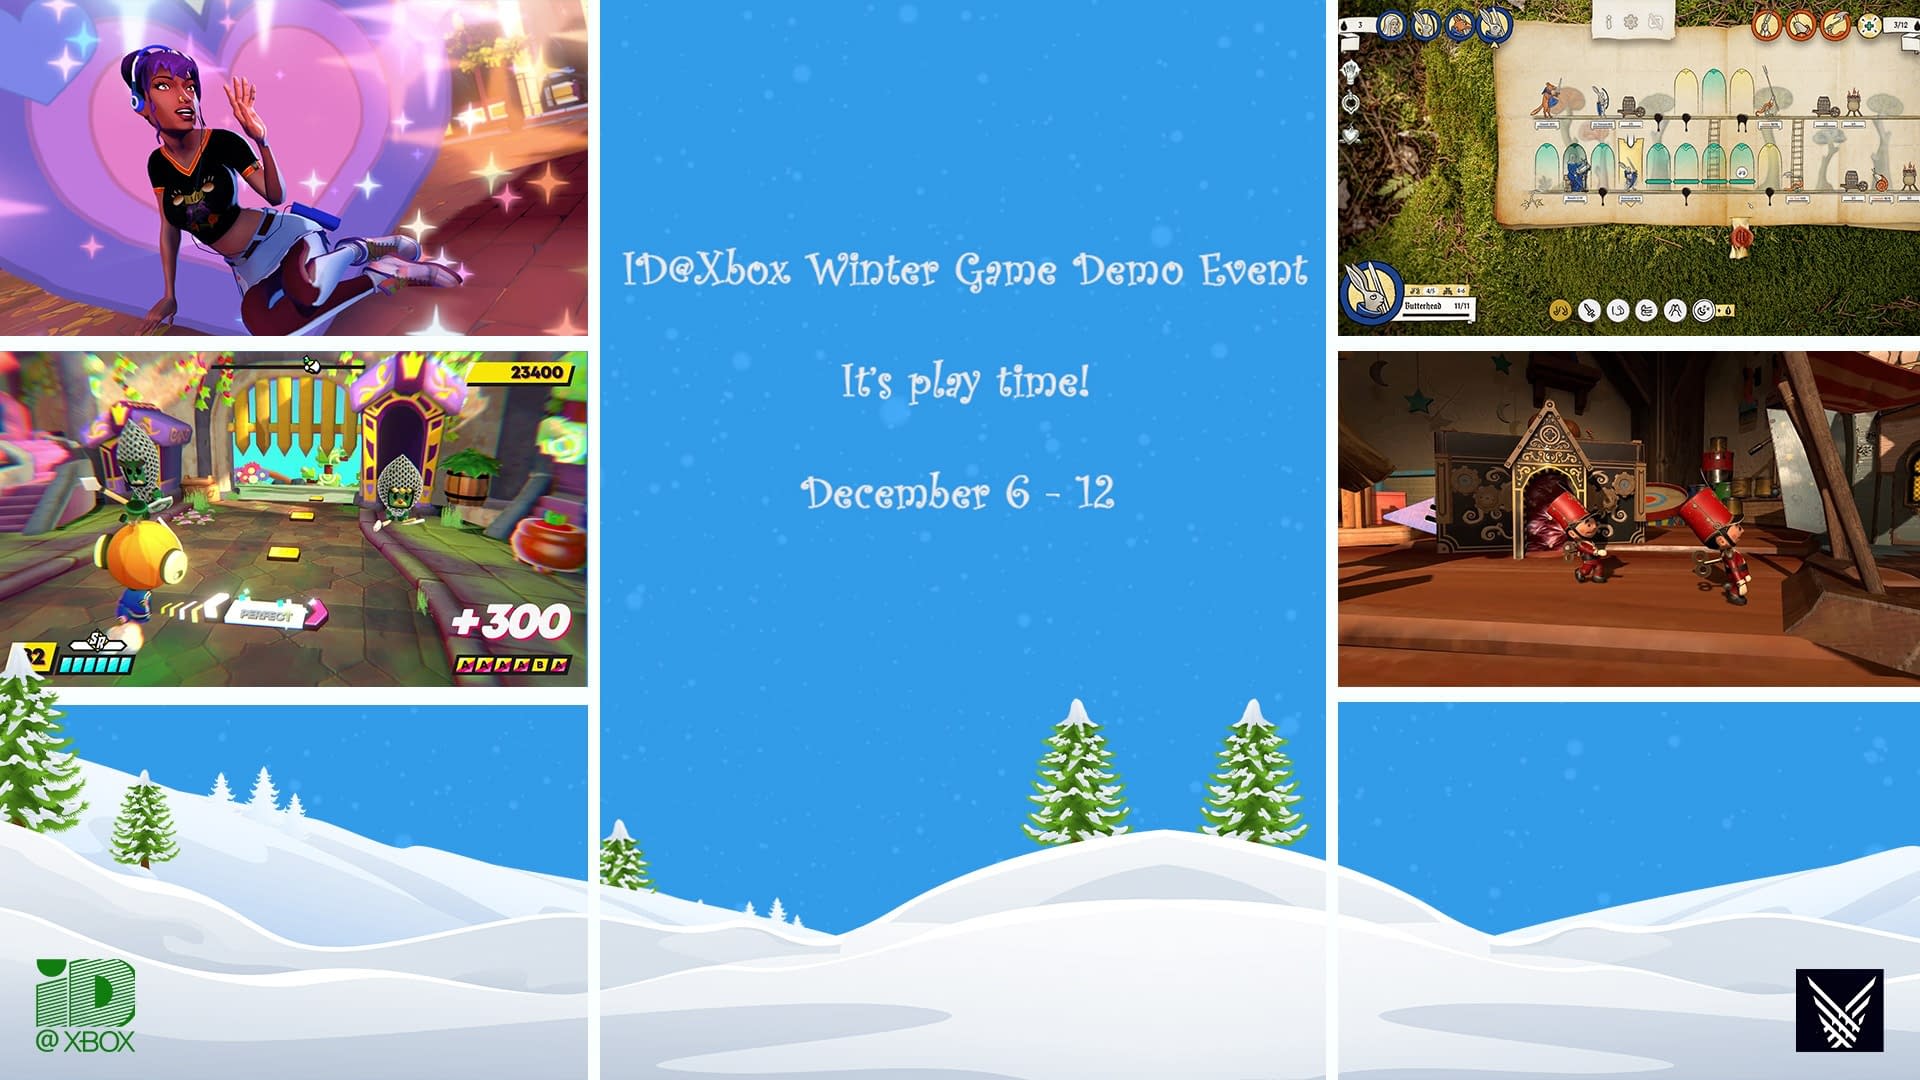 [email protected] Winter Game Demo Event Starts on December 6